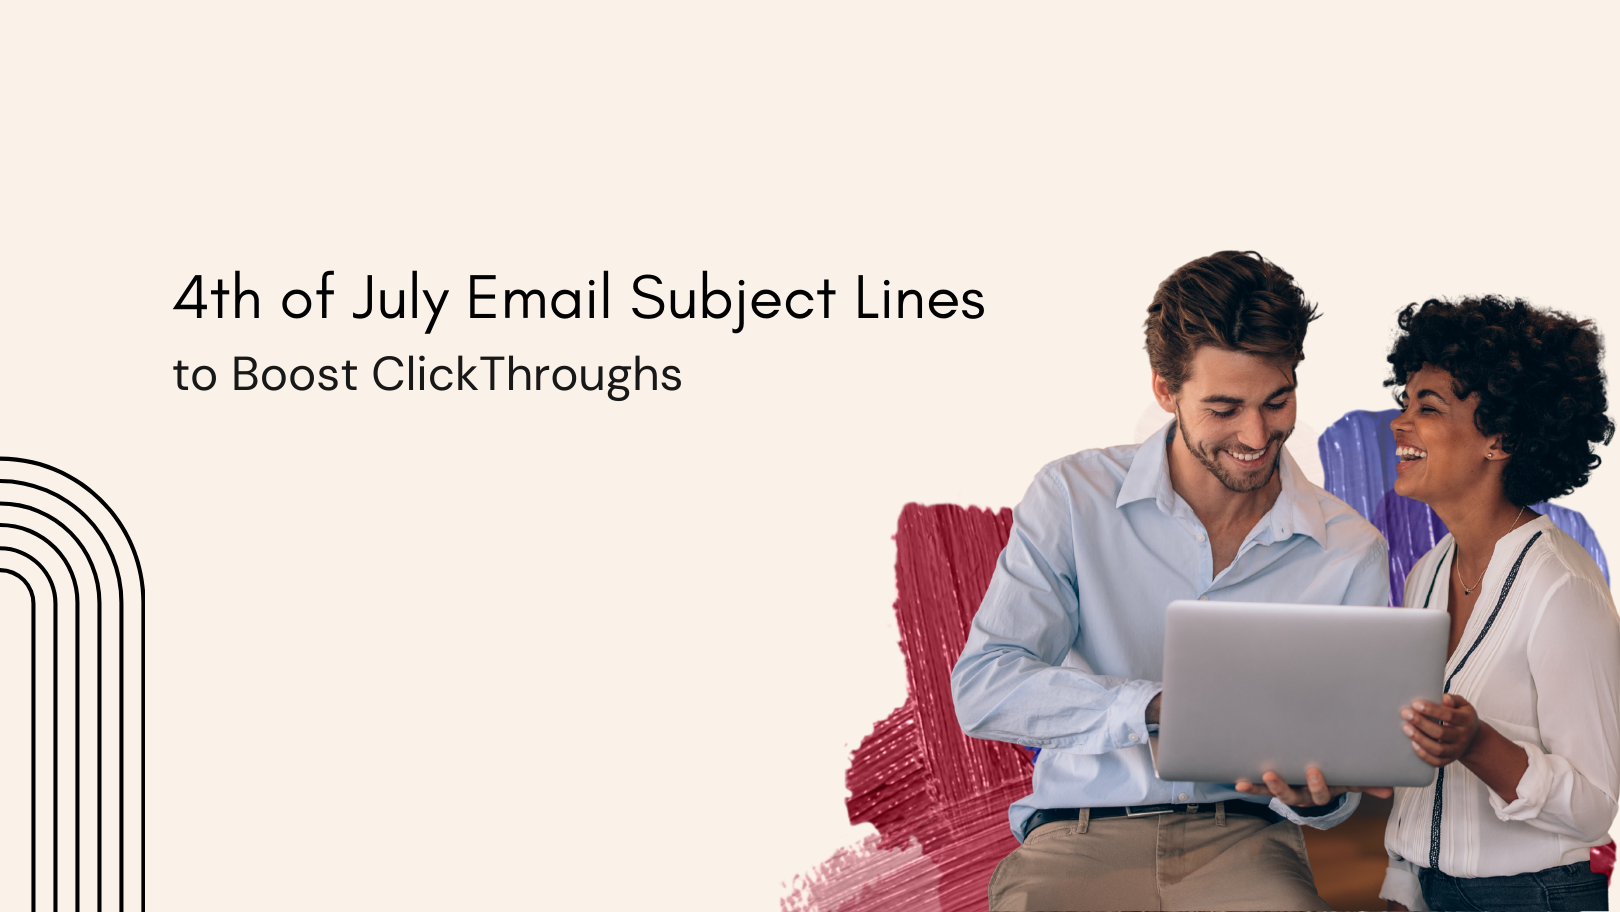 AV_4th-of-july-email-subject-lines-to-boost-clickthroughs